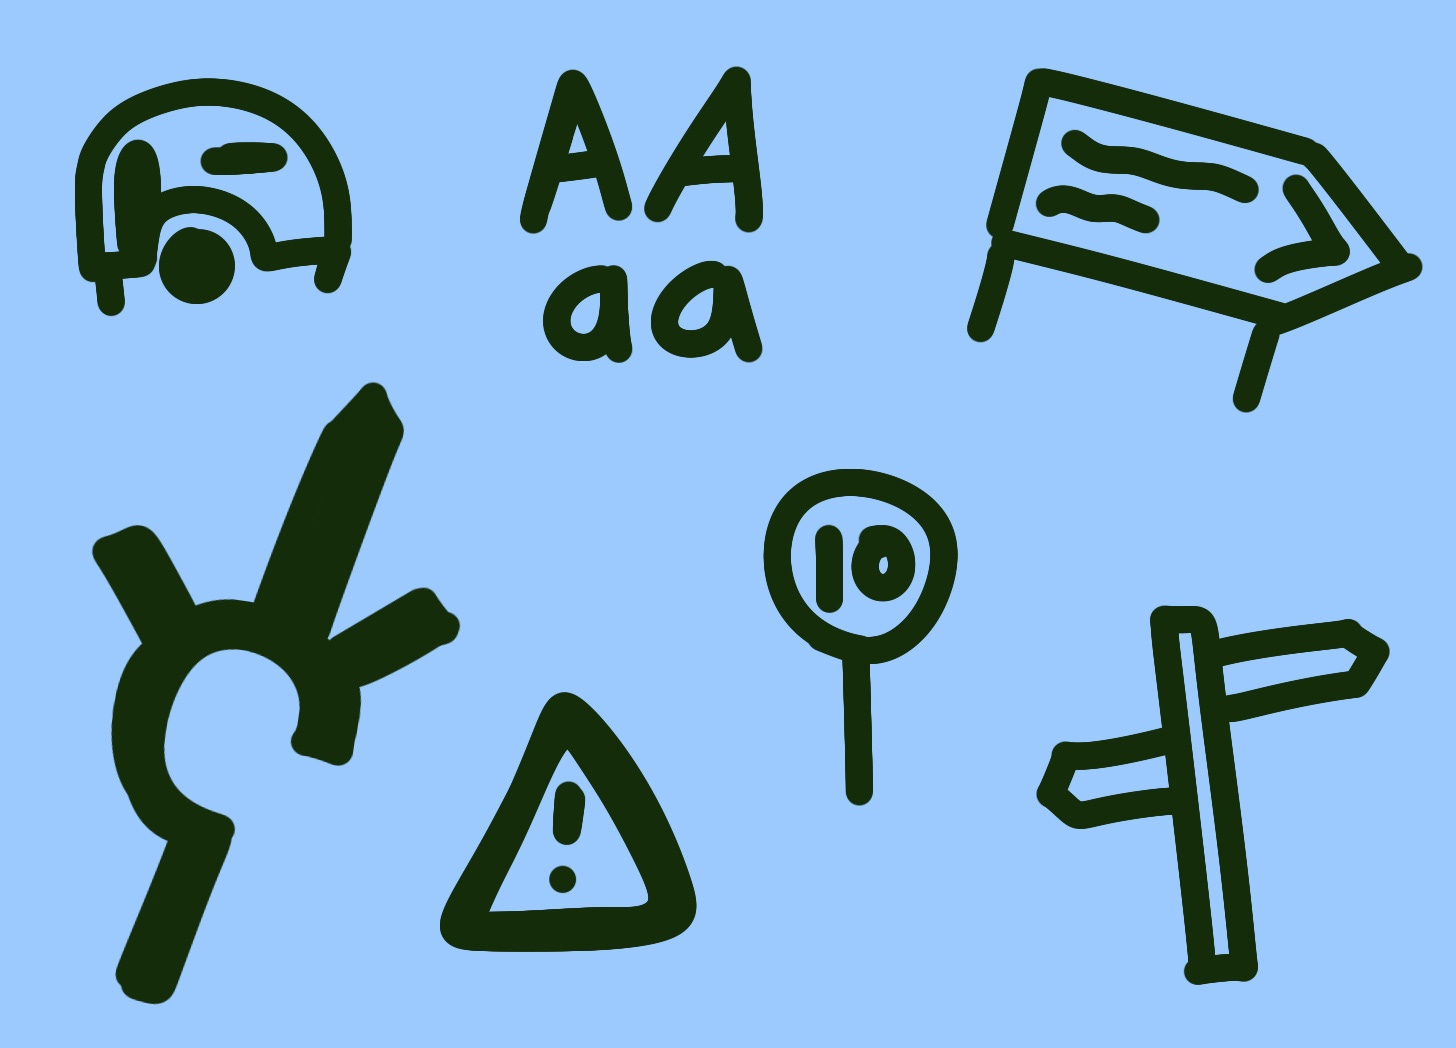 An illustration of the graphics elements on road signs